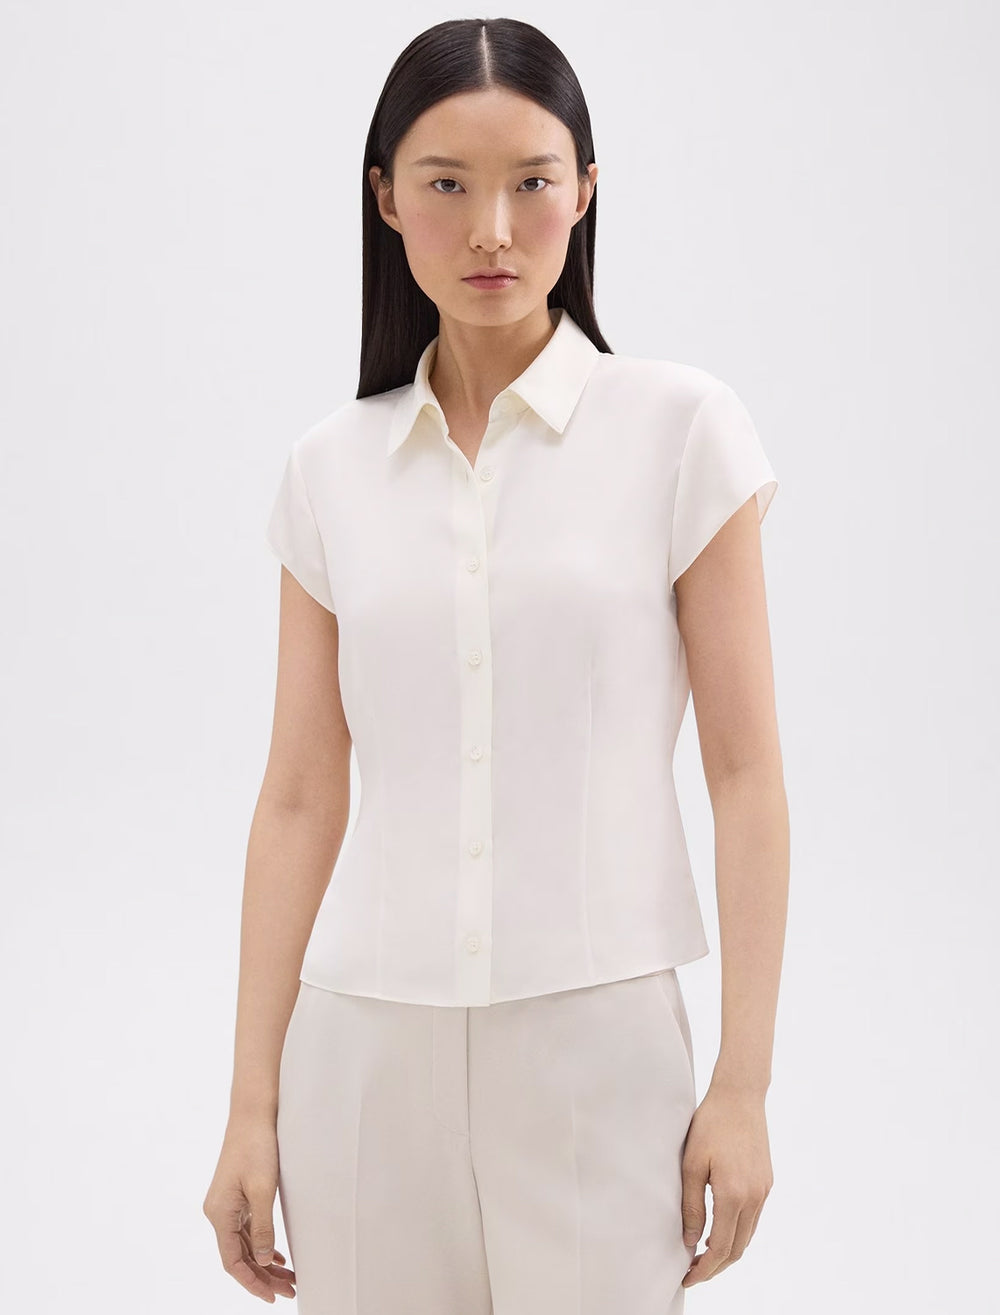 Model wearing Theory's cap sleeve blouse in ivory.